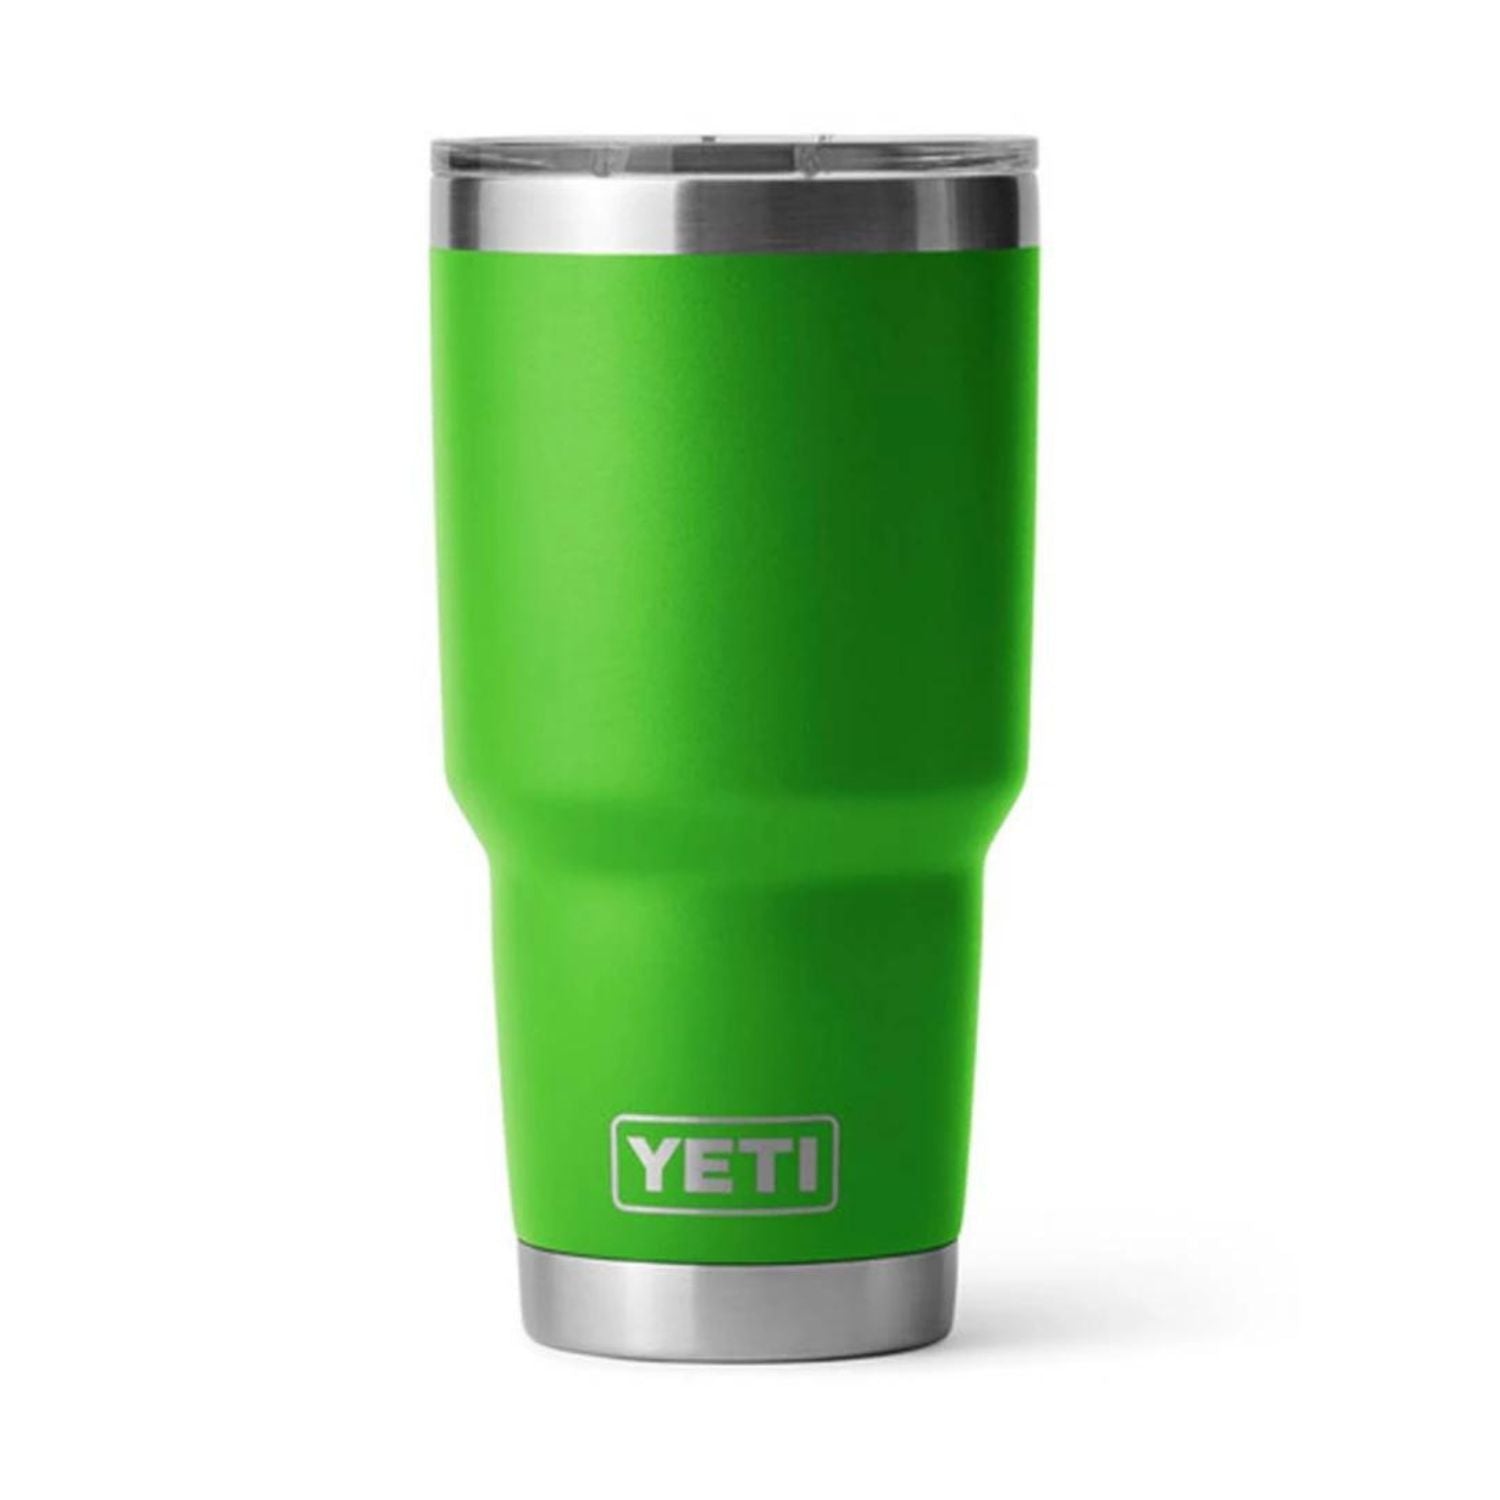 YETI Rambler 30 oz. Tumbler with MagLid Thermoses Canopy Green 12042556